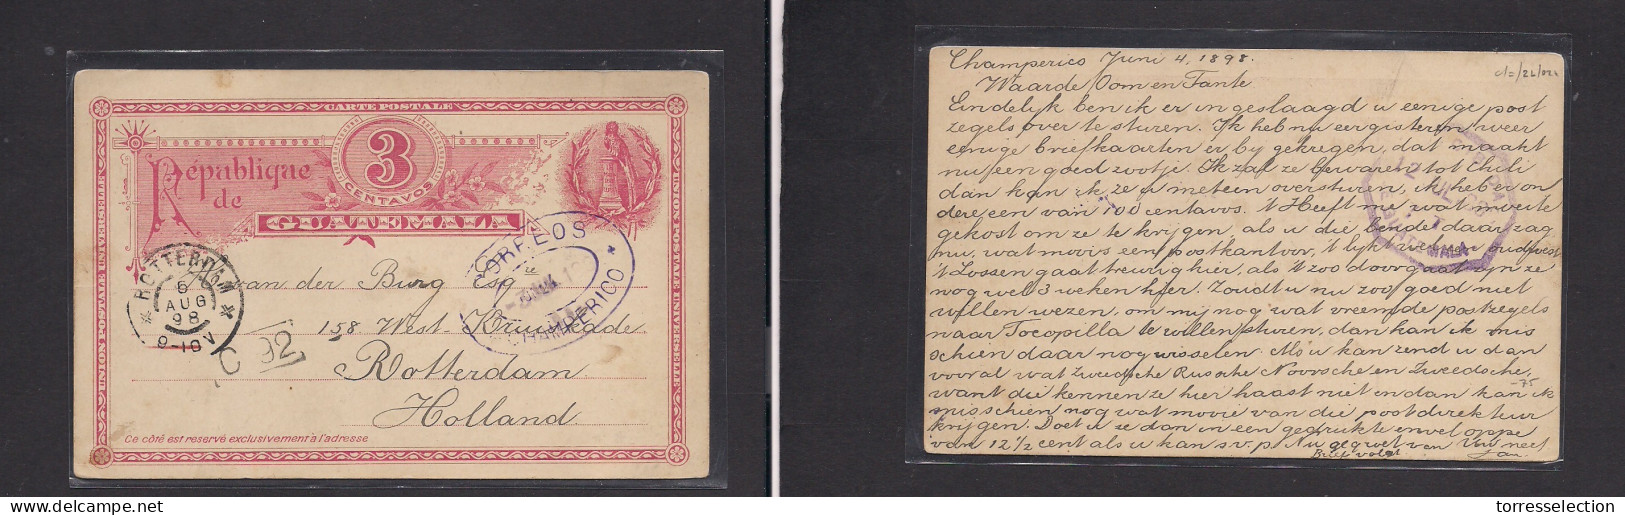 GUATEMALA. 1898 (3-4 June) Champerico - Netherlands, Rotterdam (6 Aug) 3c Red Stat Card, Oval Town Ds. VF Used. - Guatemala